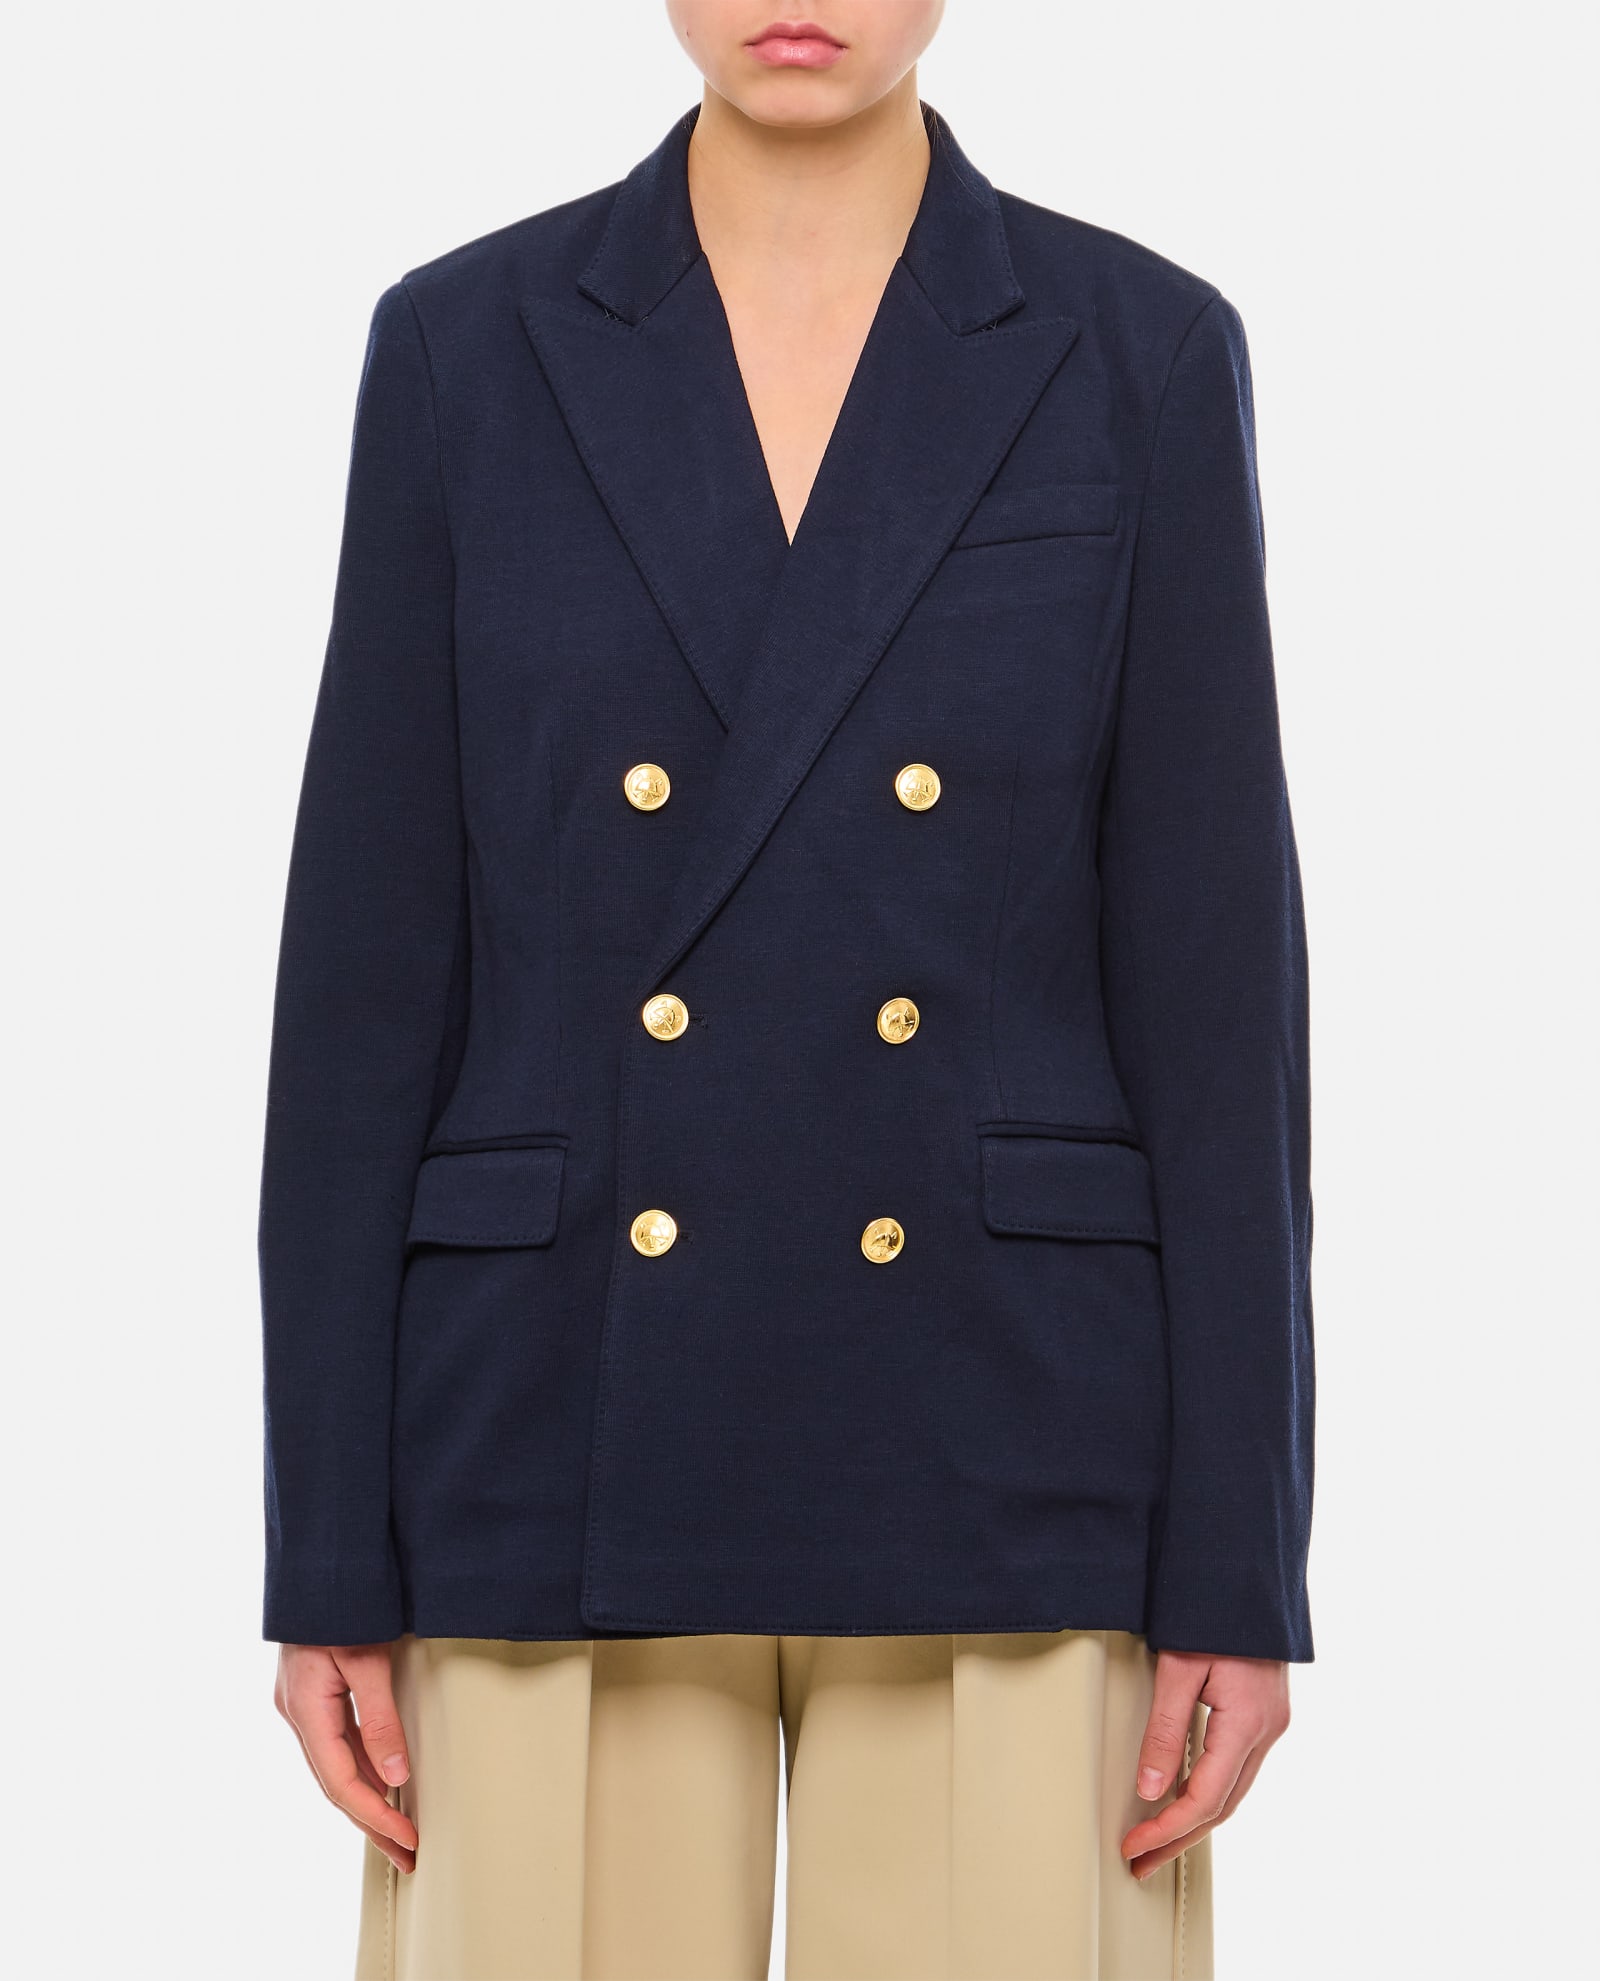 POLO RALPH LAUREN DOUBLE BREASTED JERSEY BLAZER